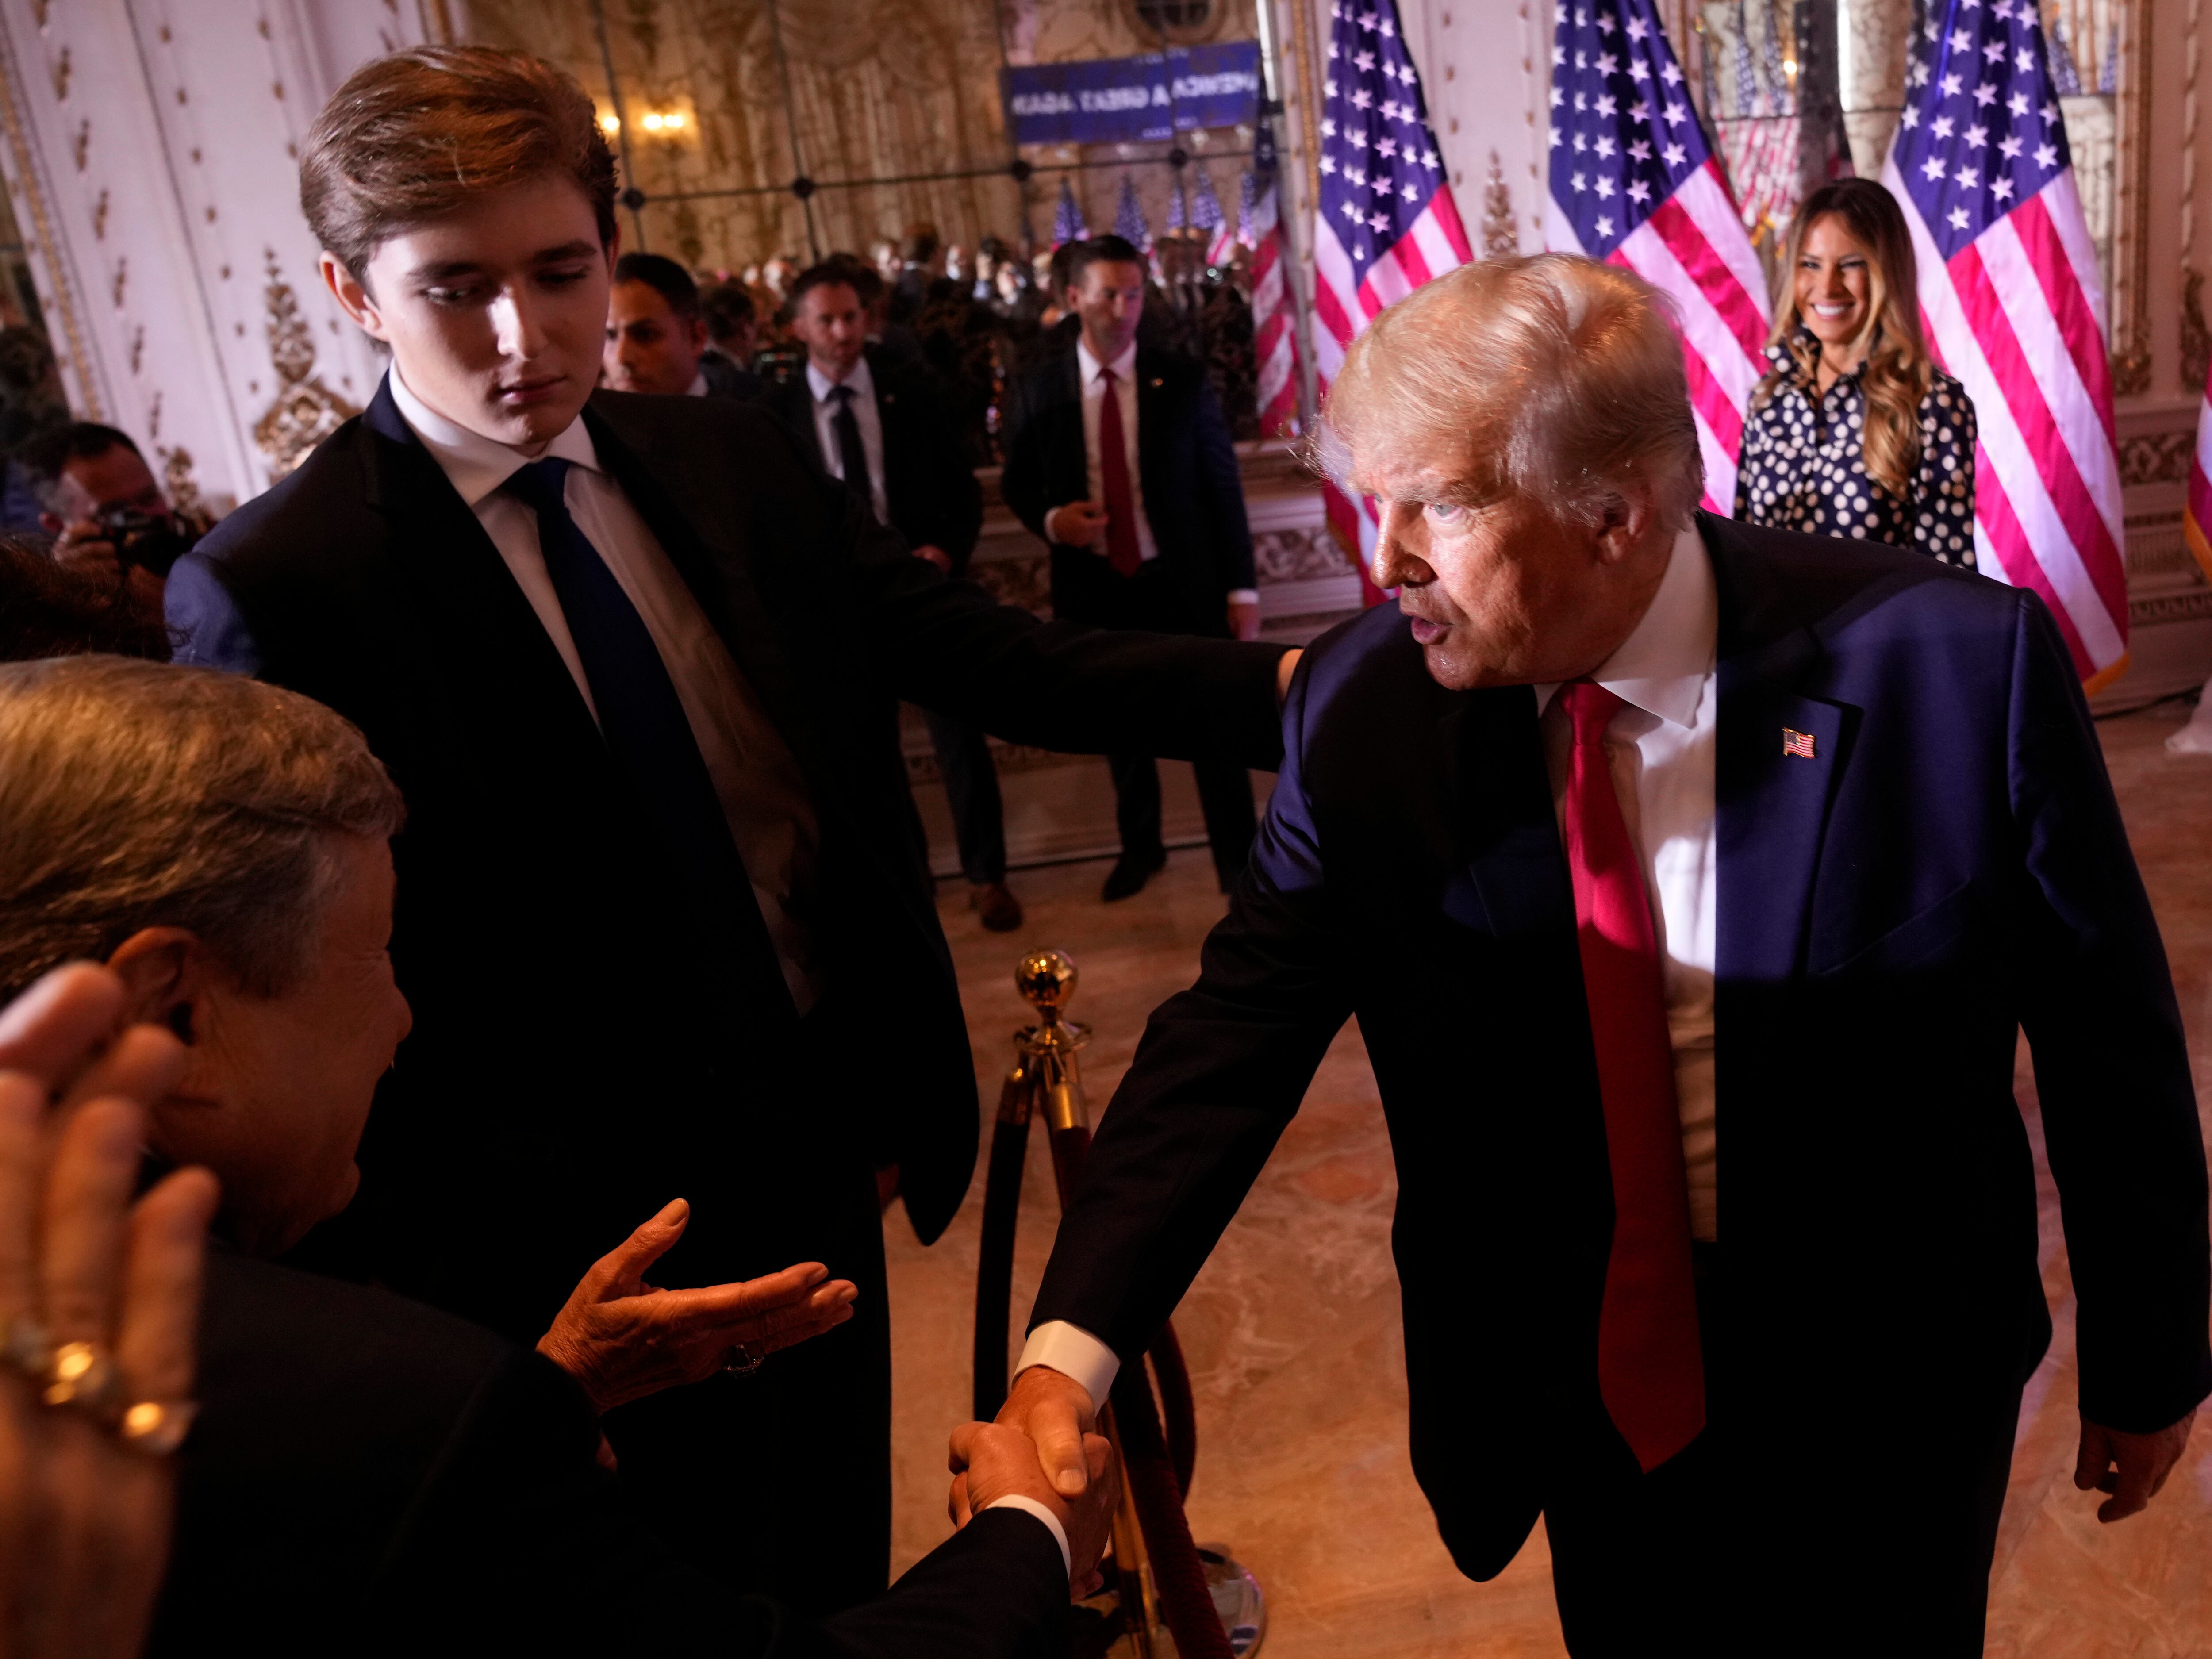 Former President Donald Trump greets people after announcing he is running for president for the third time as he speaks at Mar-a-Lago in Palm Beach, Fla., in 2022 as his son, Barron Trump, watches.